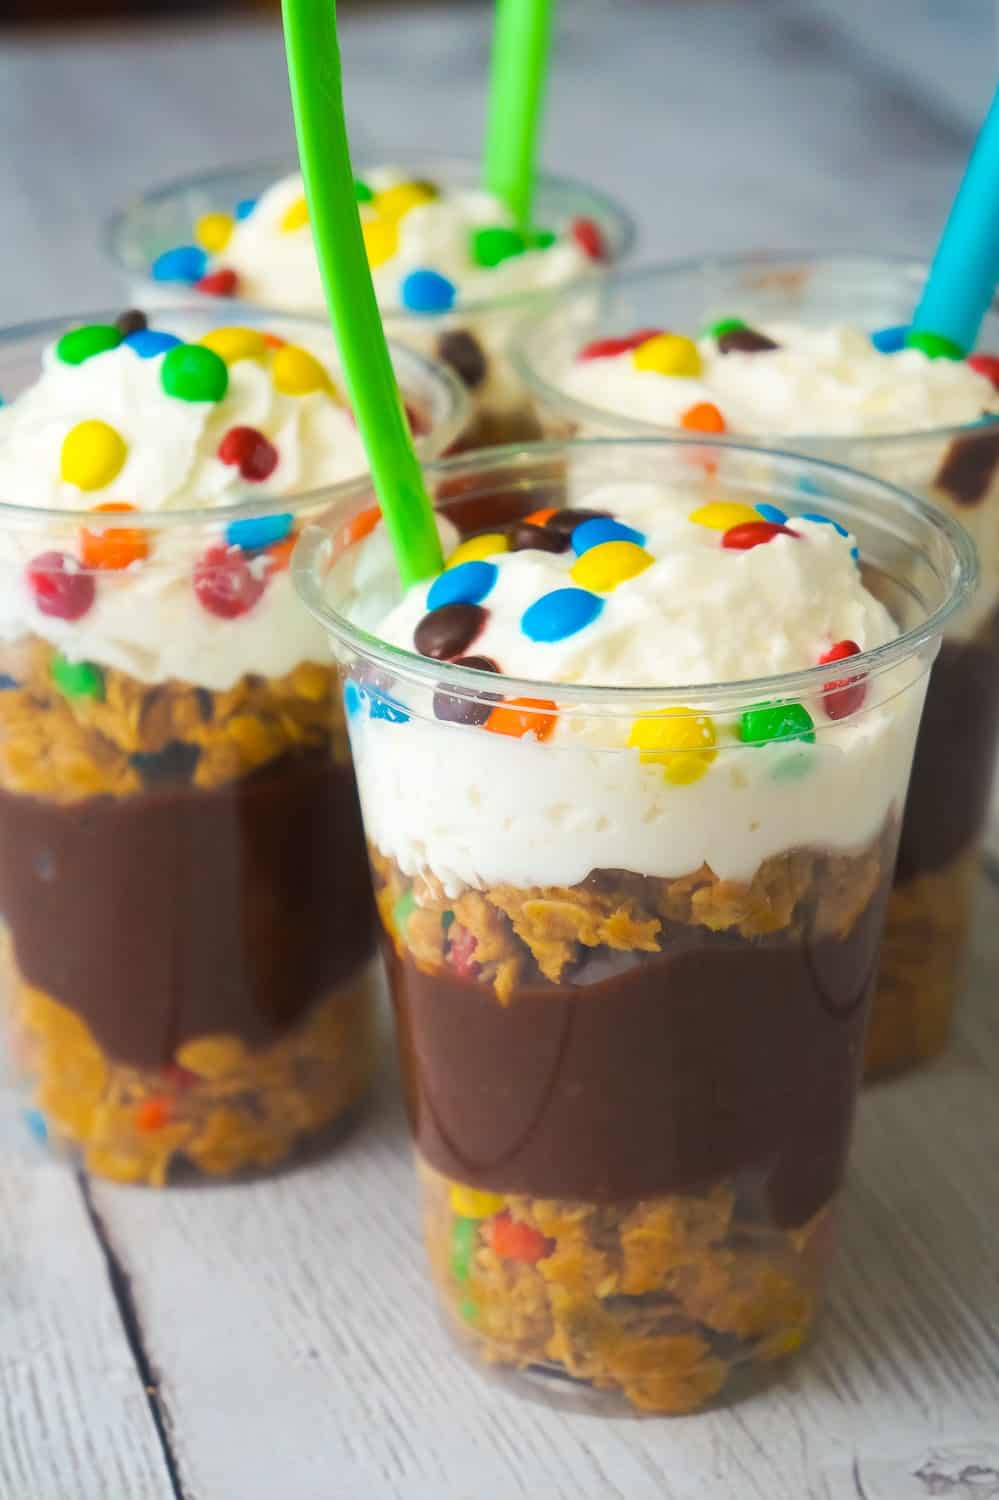 Monster Cookie Pudding Parfaits are a fun and easy no bake dessert perfect for summer. These colourful dessert cups are loaded with oatmeal peanut butter cookie dough, chocolate pudding and mini M&Ms.